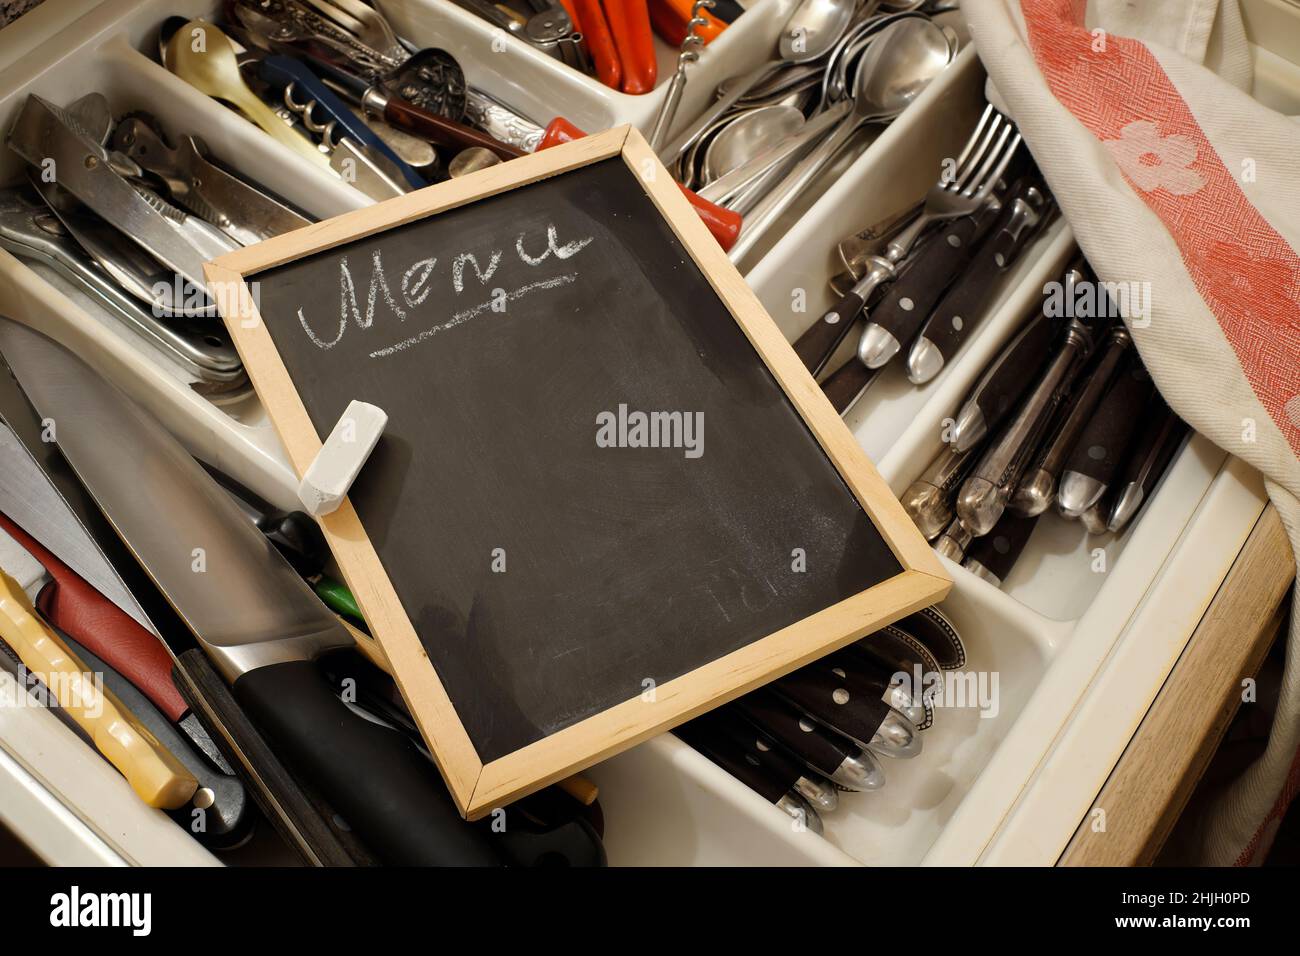 empty menu blackbord with free copy space and professional kitchen utensils.Gastronomy, food and drink occupation, business concept. Stock Photo